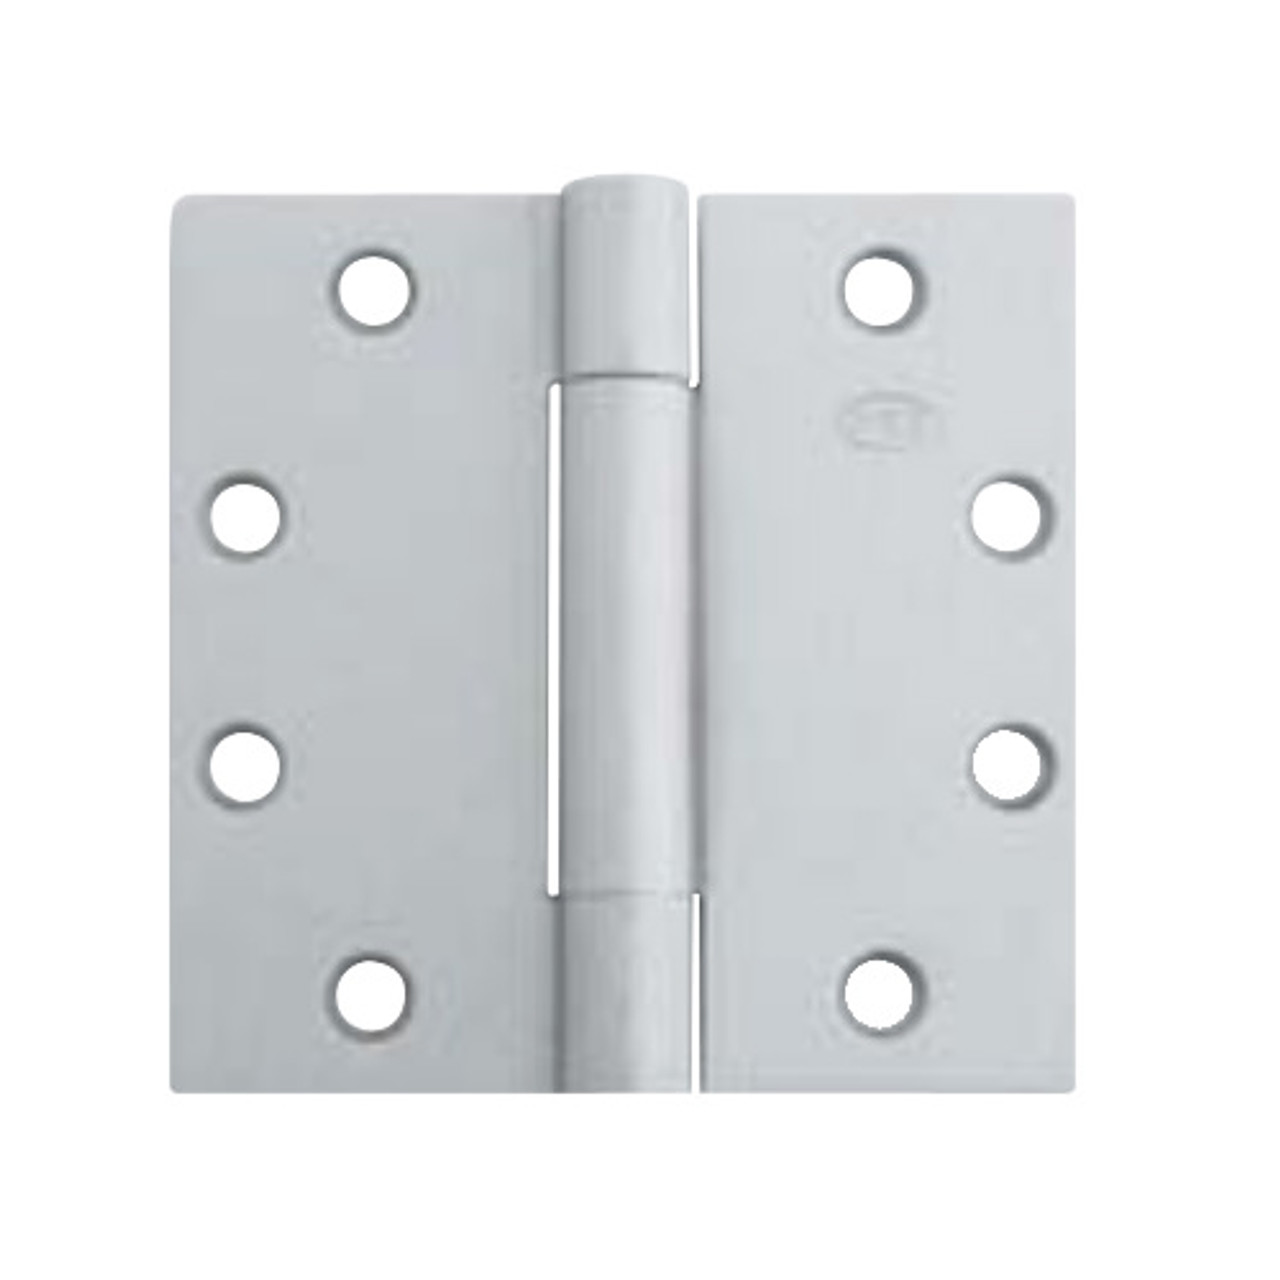 3CB1WT-4-5x6-600 IVES 3 Knuckle Concealed Bearing Full Mortise Wide Throw Butt Hinge in Primed for Paint - Steel